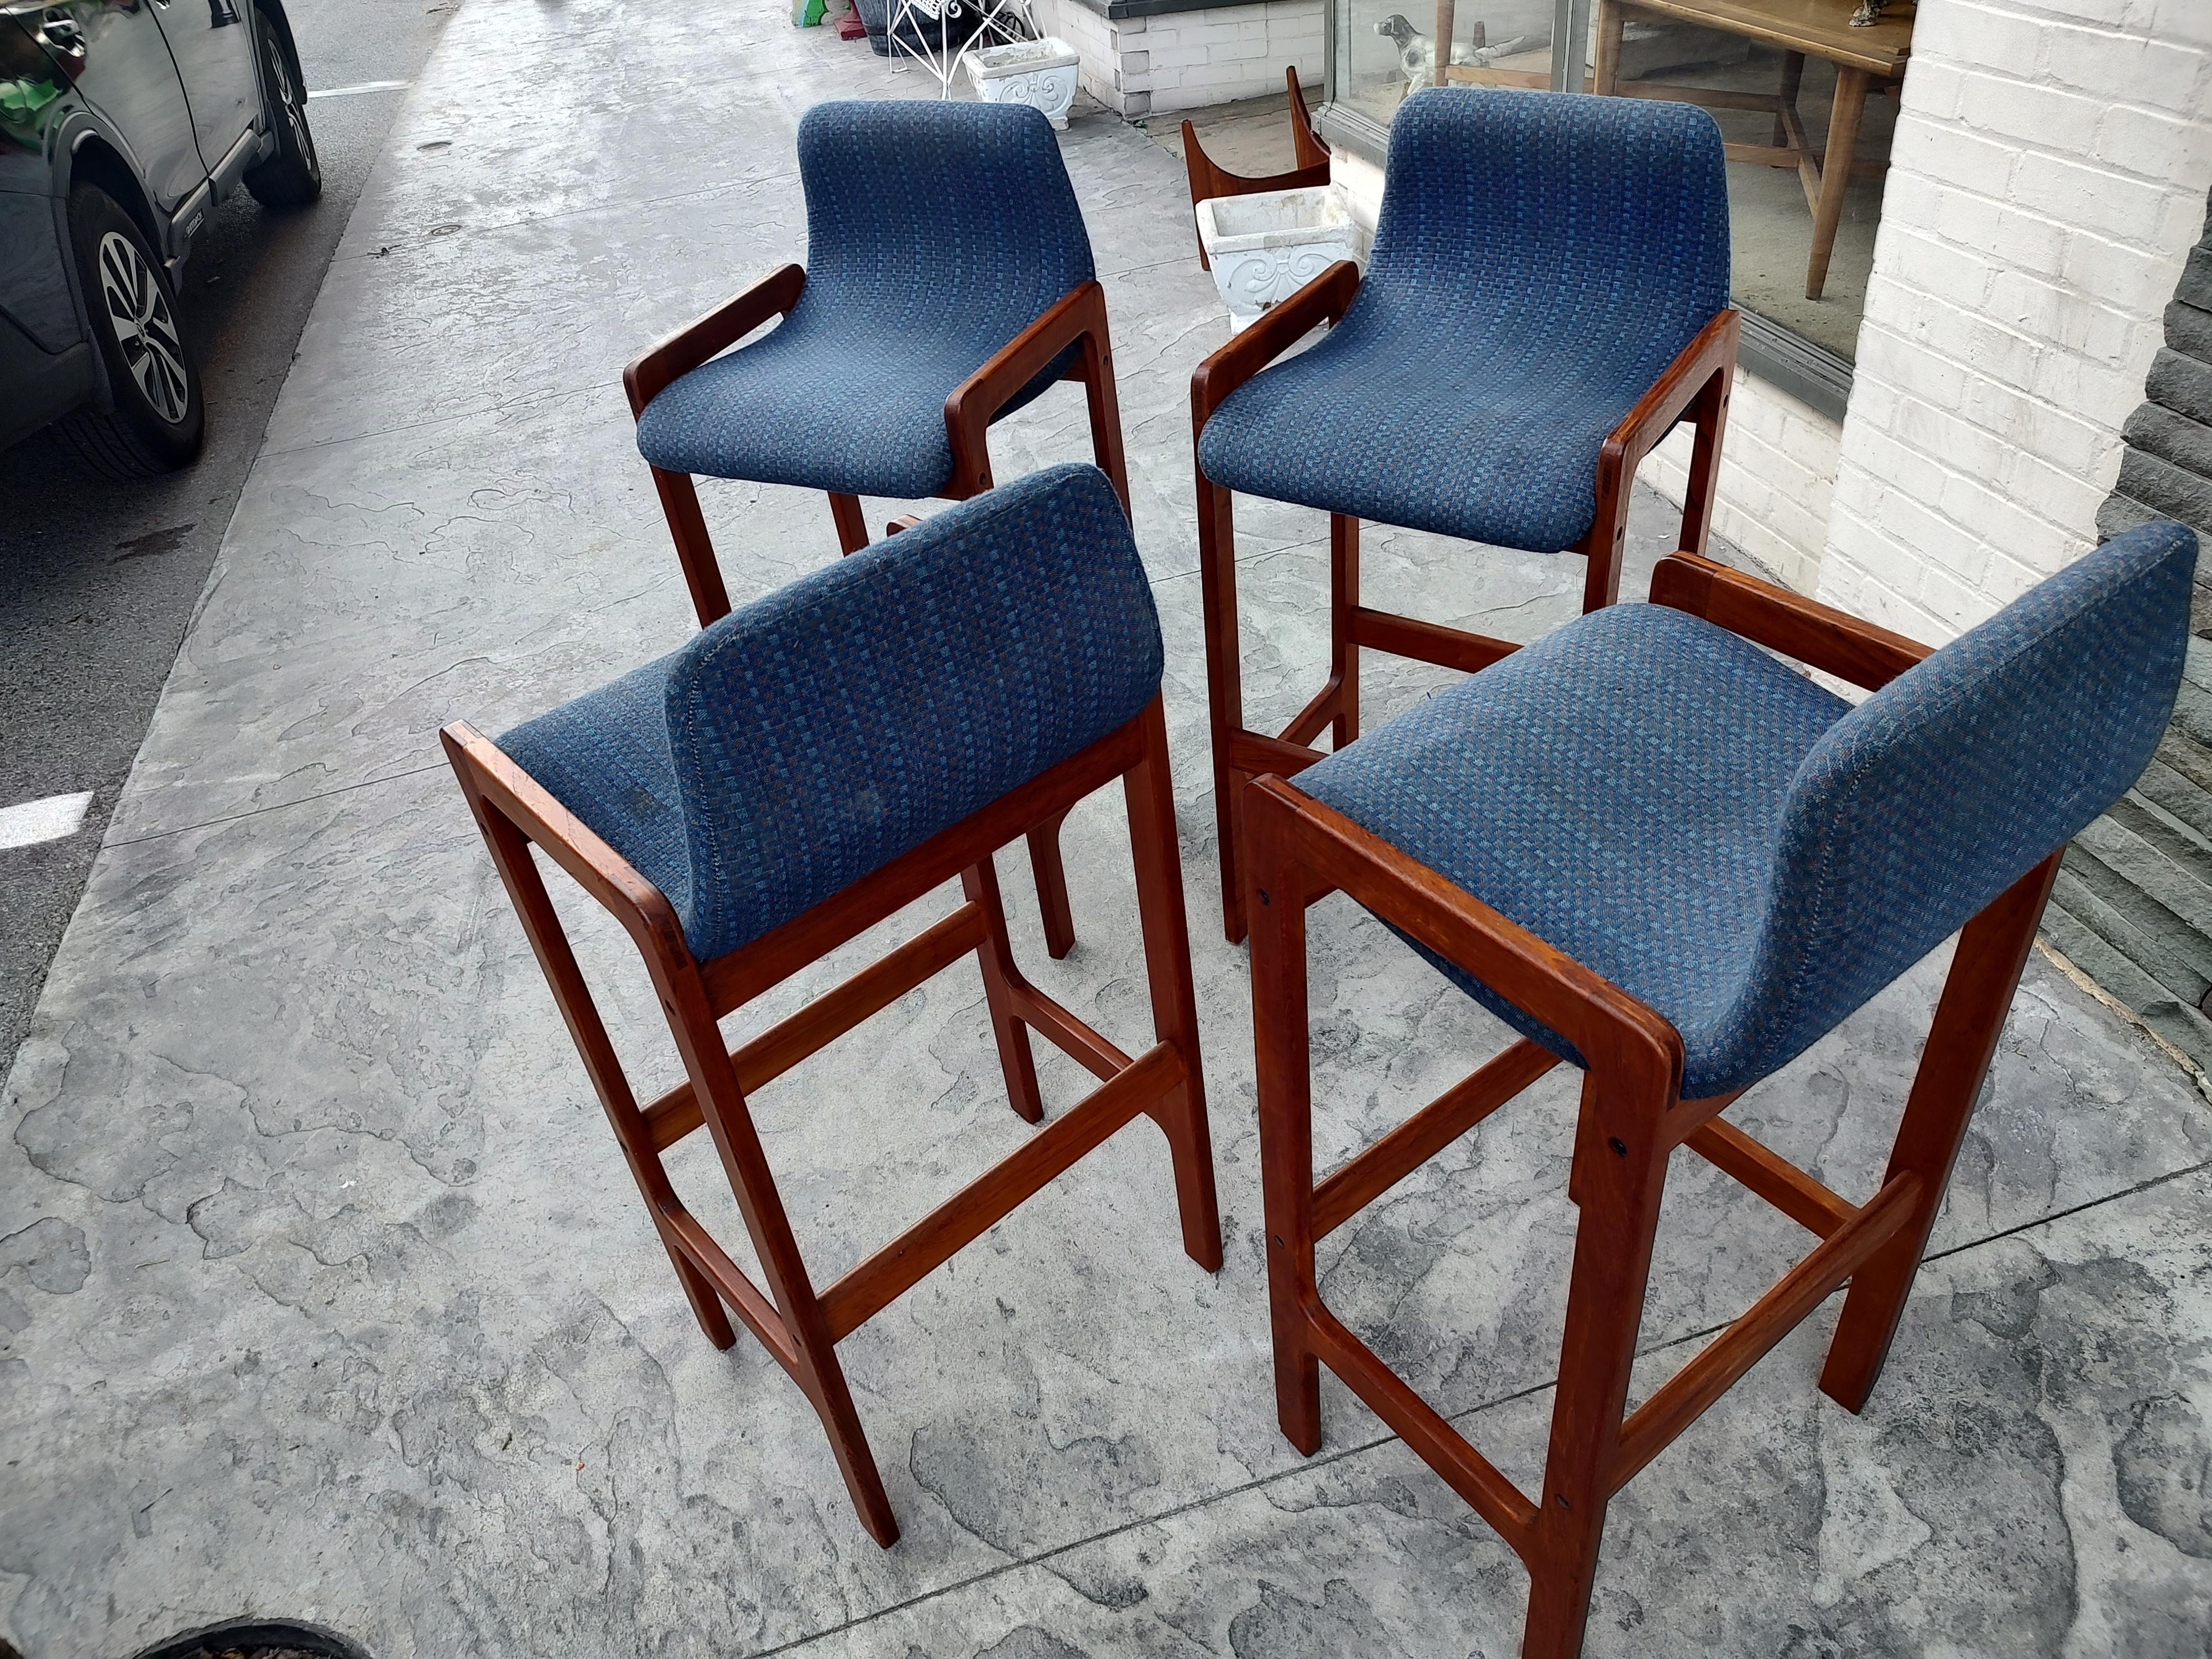 Hand-Crafted Mid-Century Modern Sculptural Scandinavian Teak Bar Stools by D-Scan 4 Available